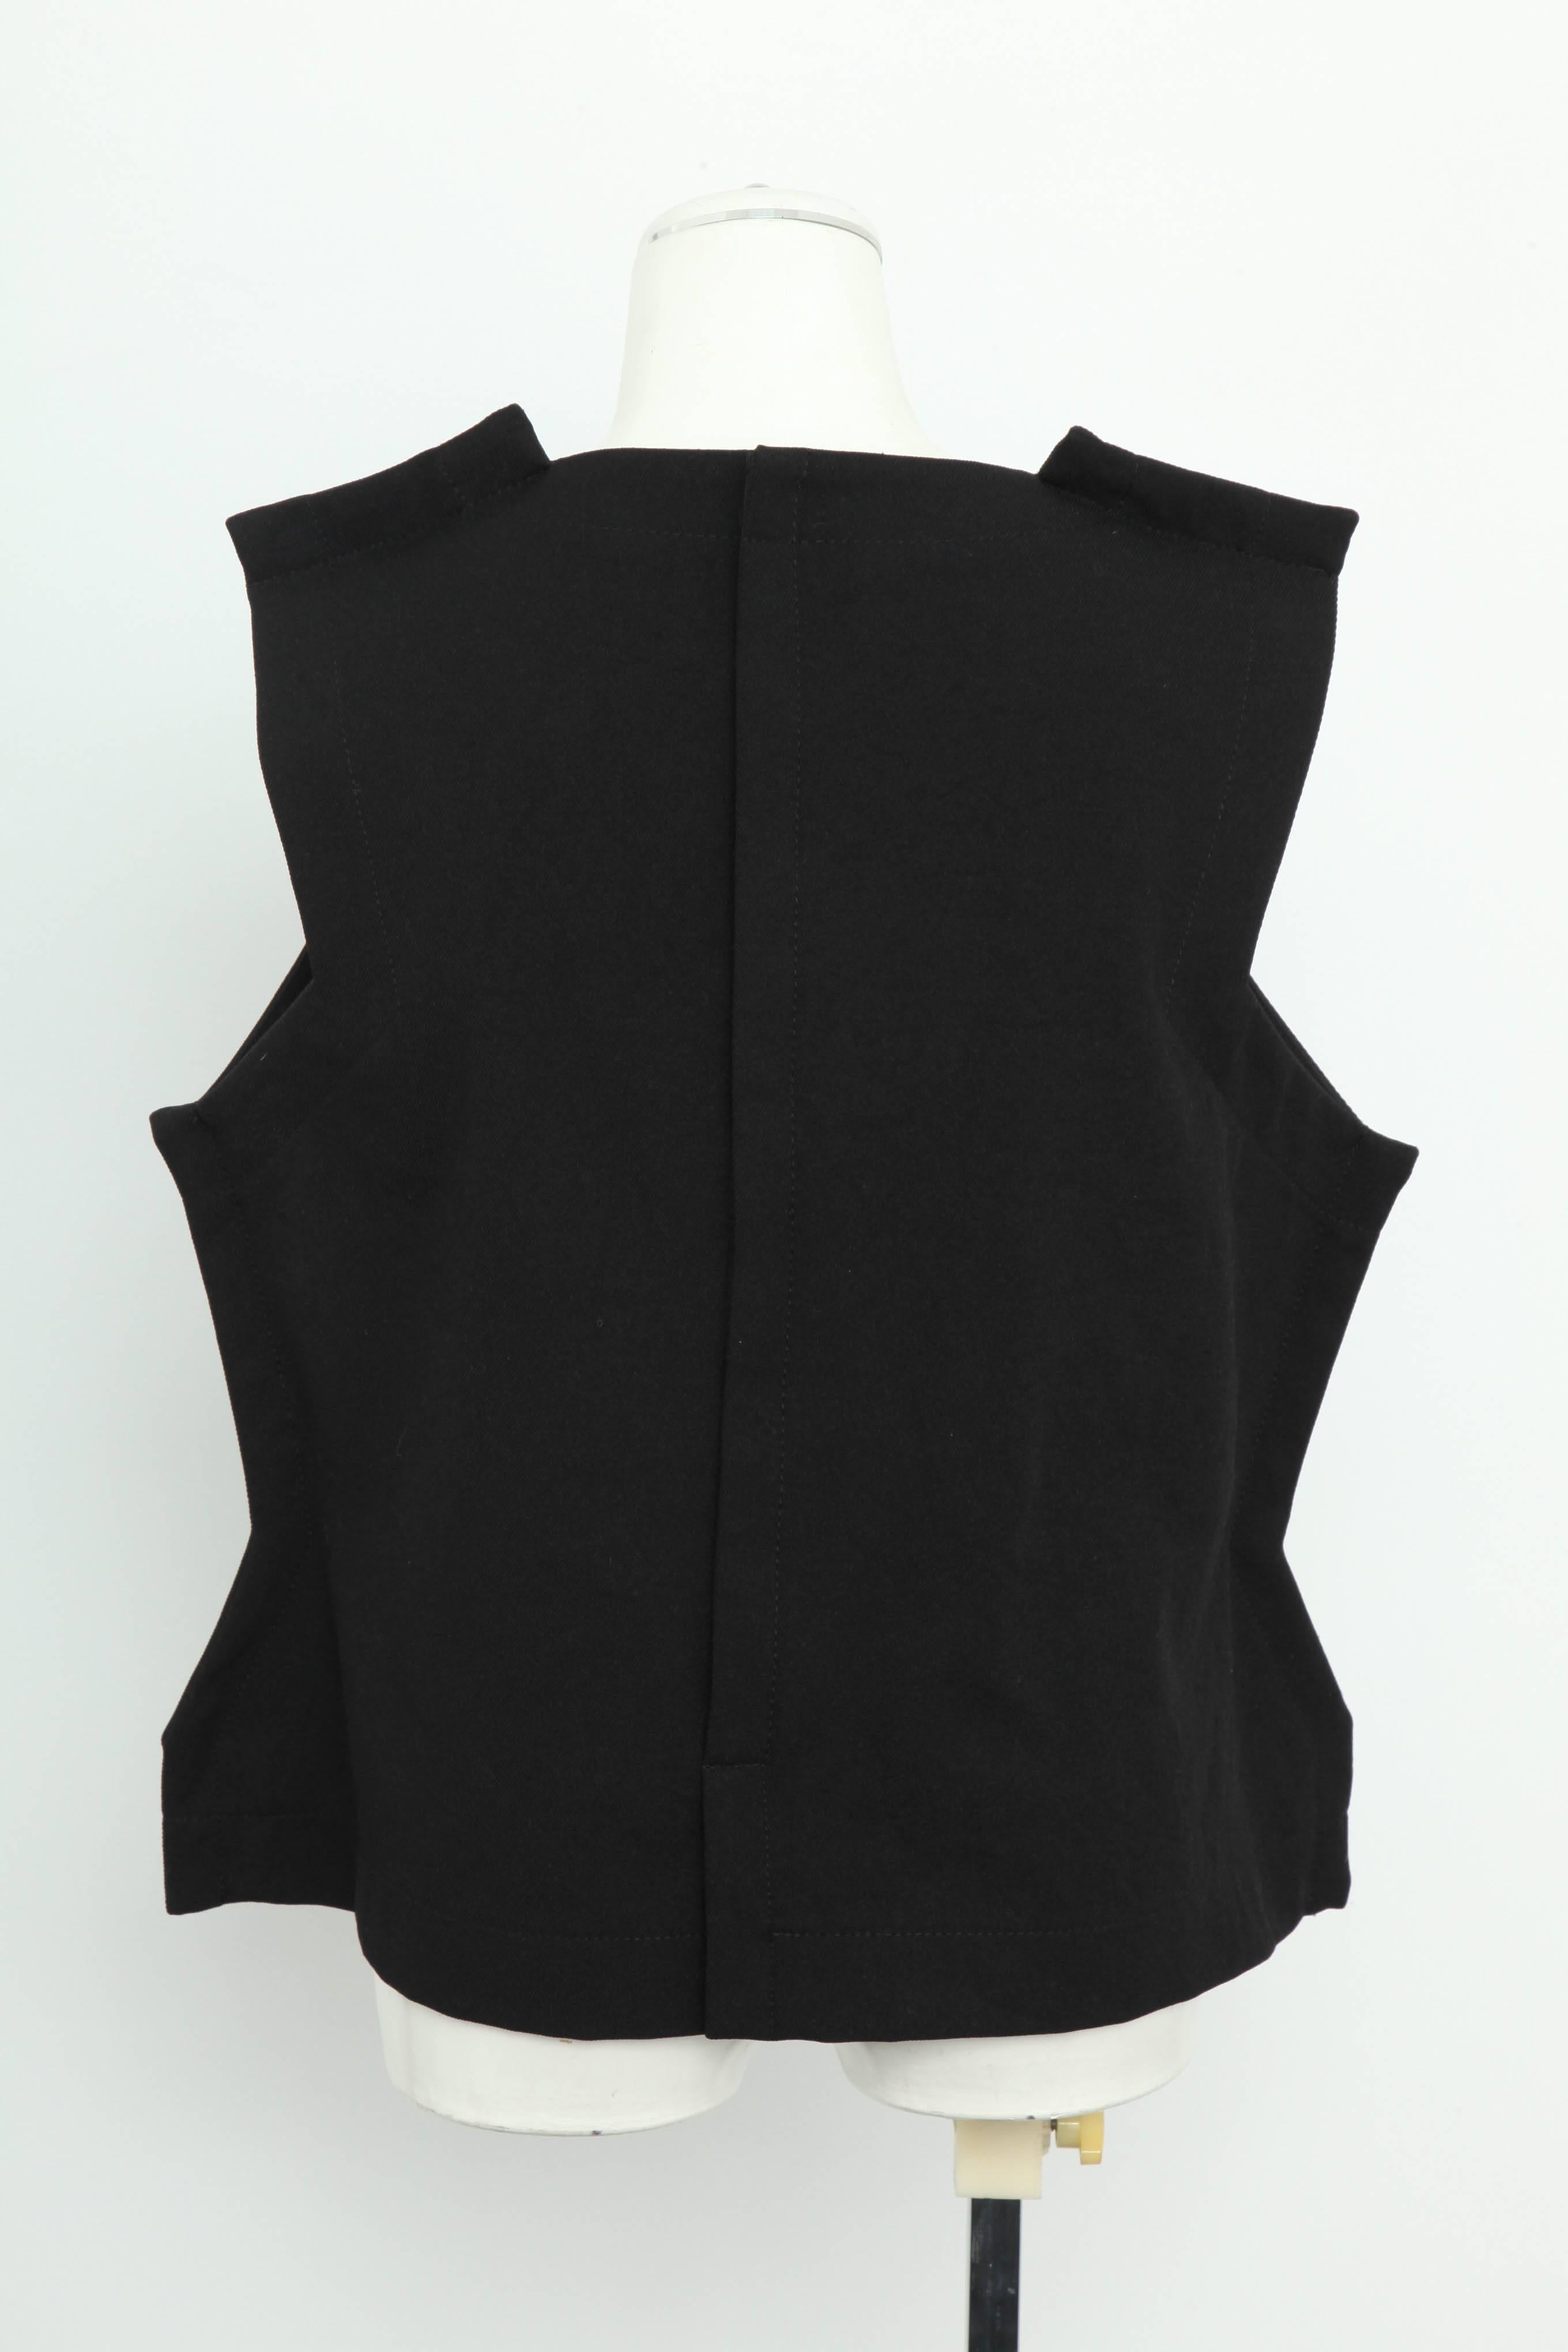 Comme Des Garcons Rare Black Top from 2 Dimensional Collection In Good Condition For Sale In Chicago, IL